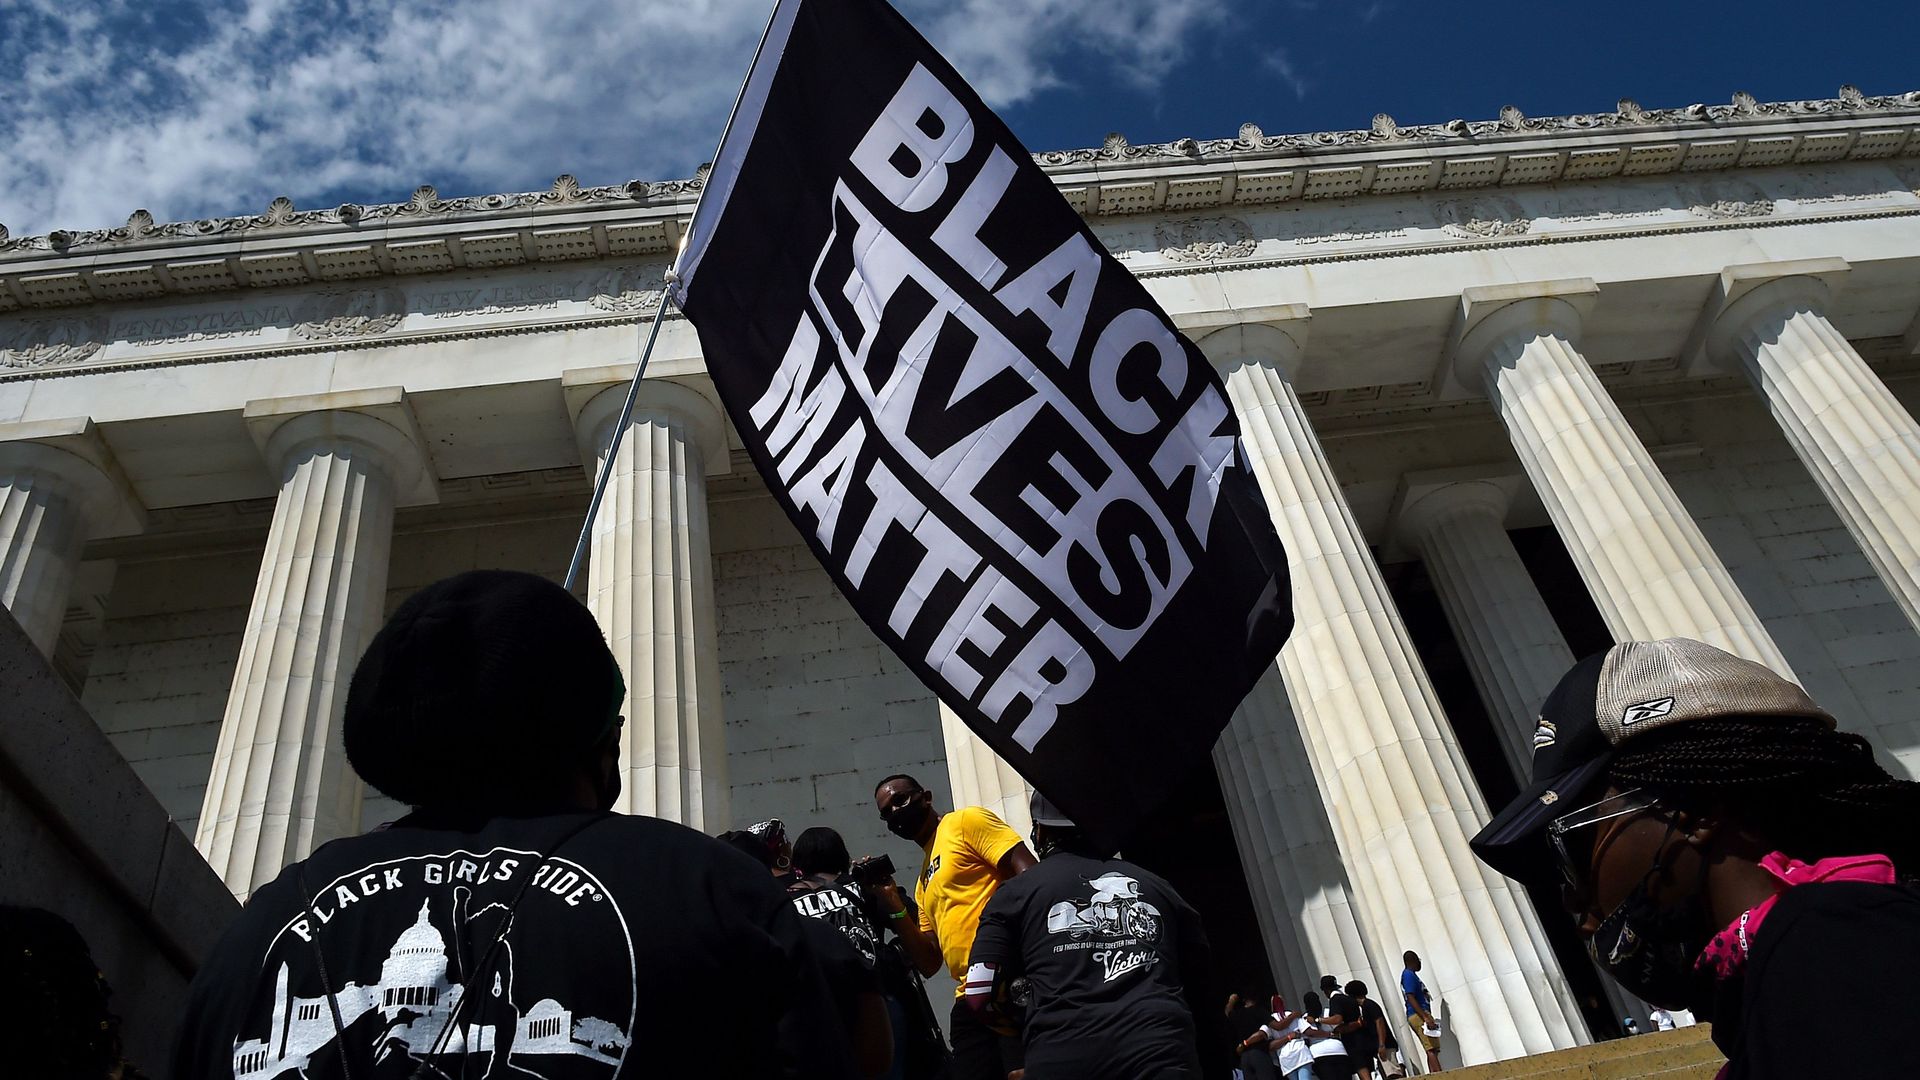 Photo of a person holding a Black Lives Matter flag at a protest in front of the Lincoln Memorial